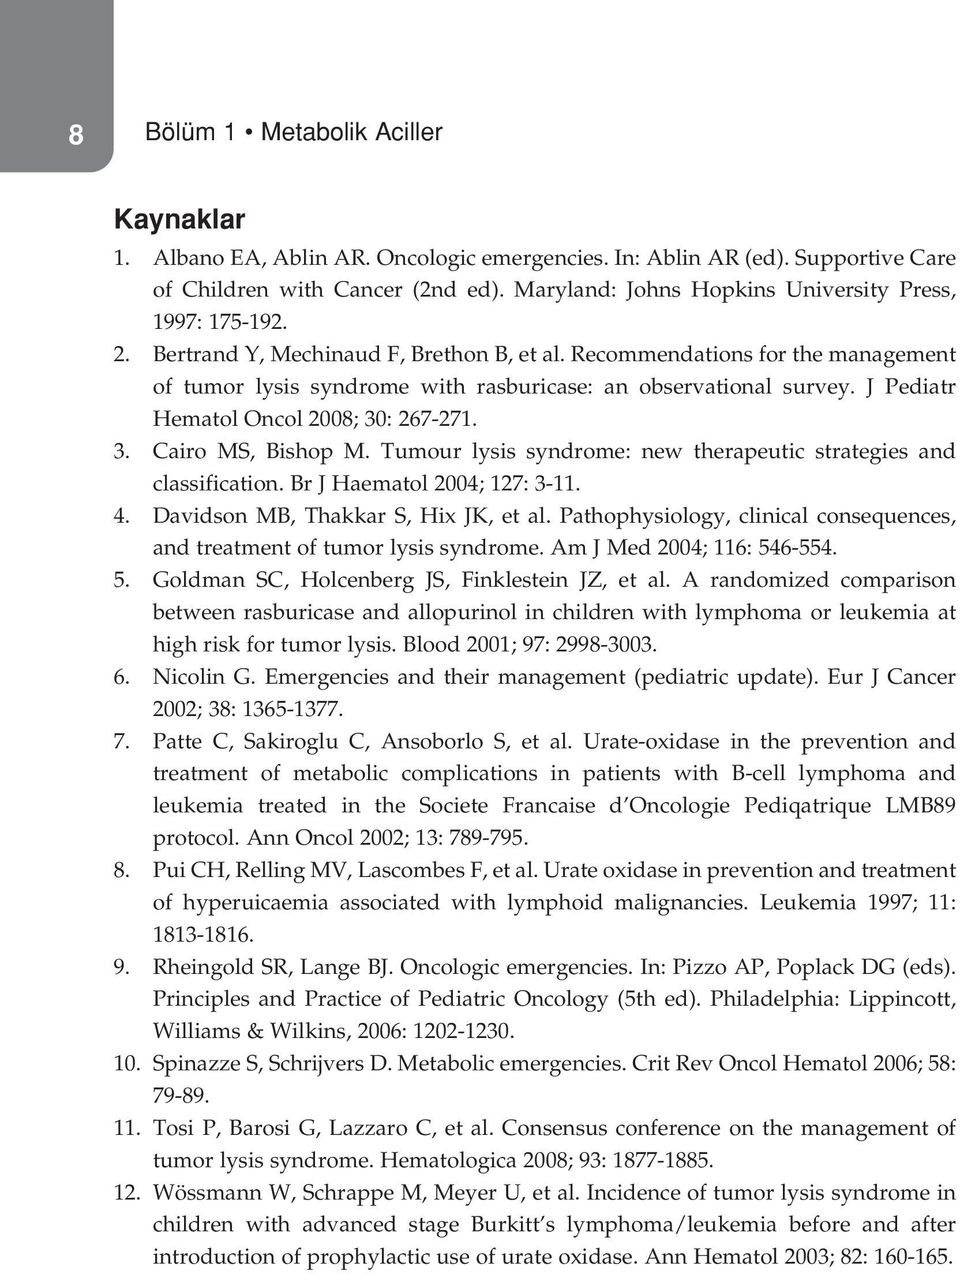 Recommendations for the management of tumor lysis syndrome with rasburicase: an observational survey. J Pediatr Hematol Oncol 2008; 30: 267-271. 3. Cairo MS, Bishop M.